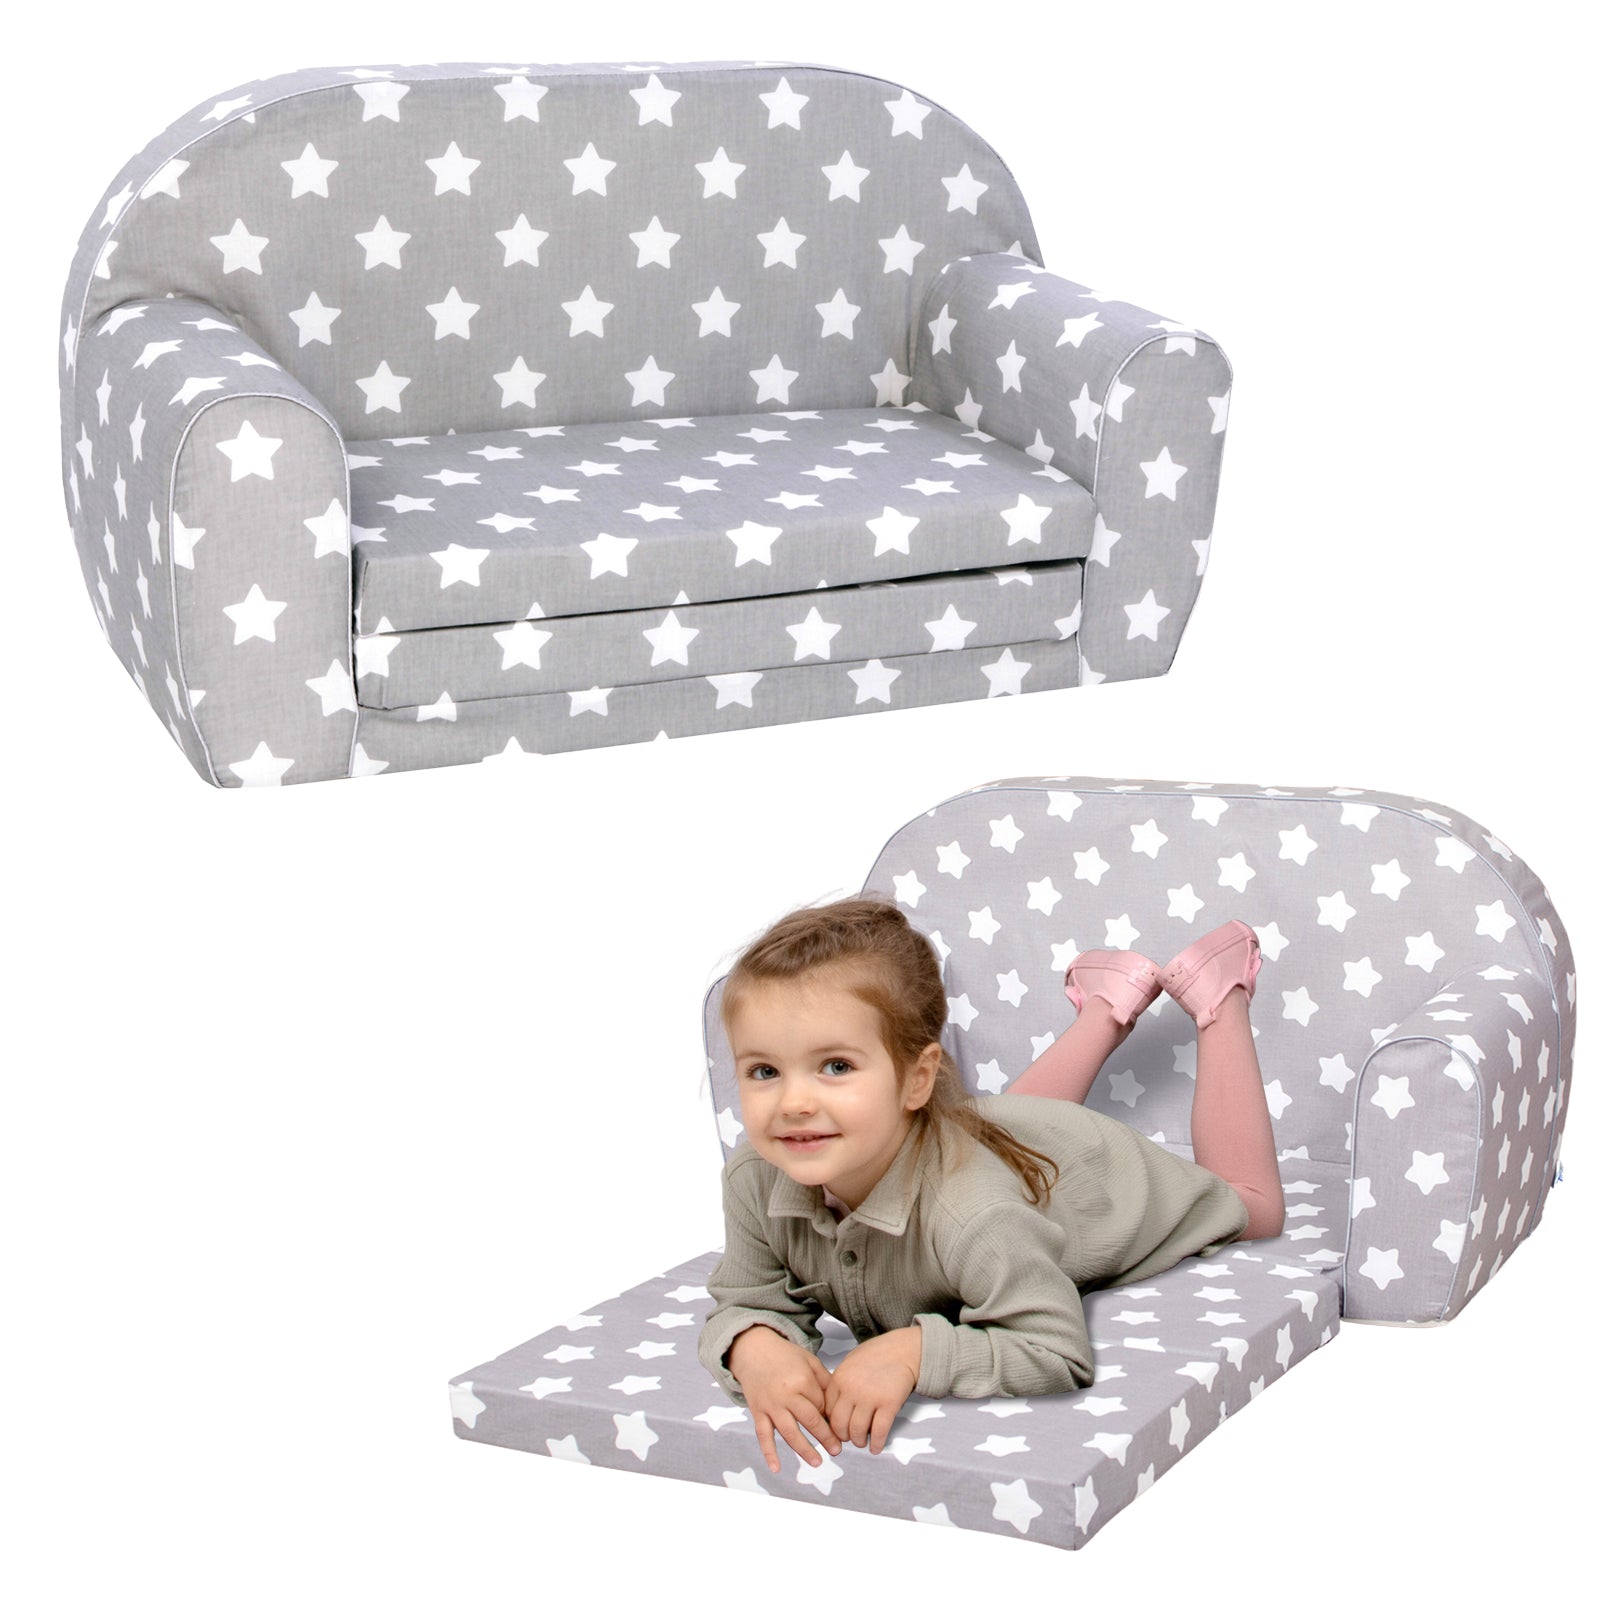 & Sofa Open Family | - Gray with Sofa Delsit DELSIT Double Toddler Flip Couch Stars - Kids